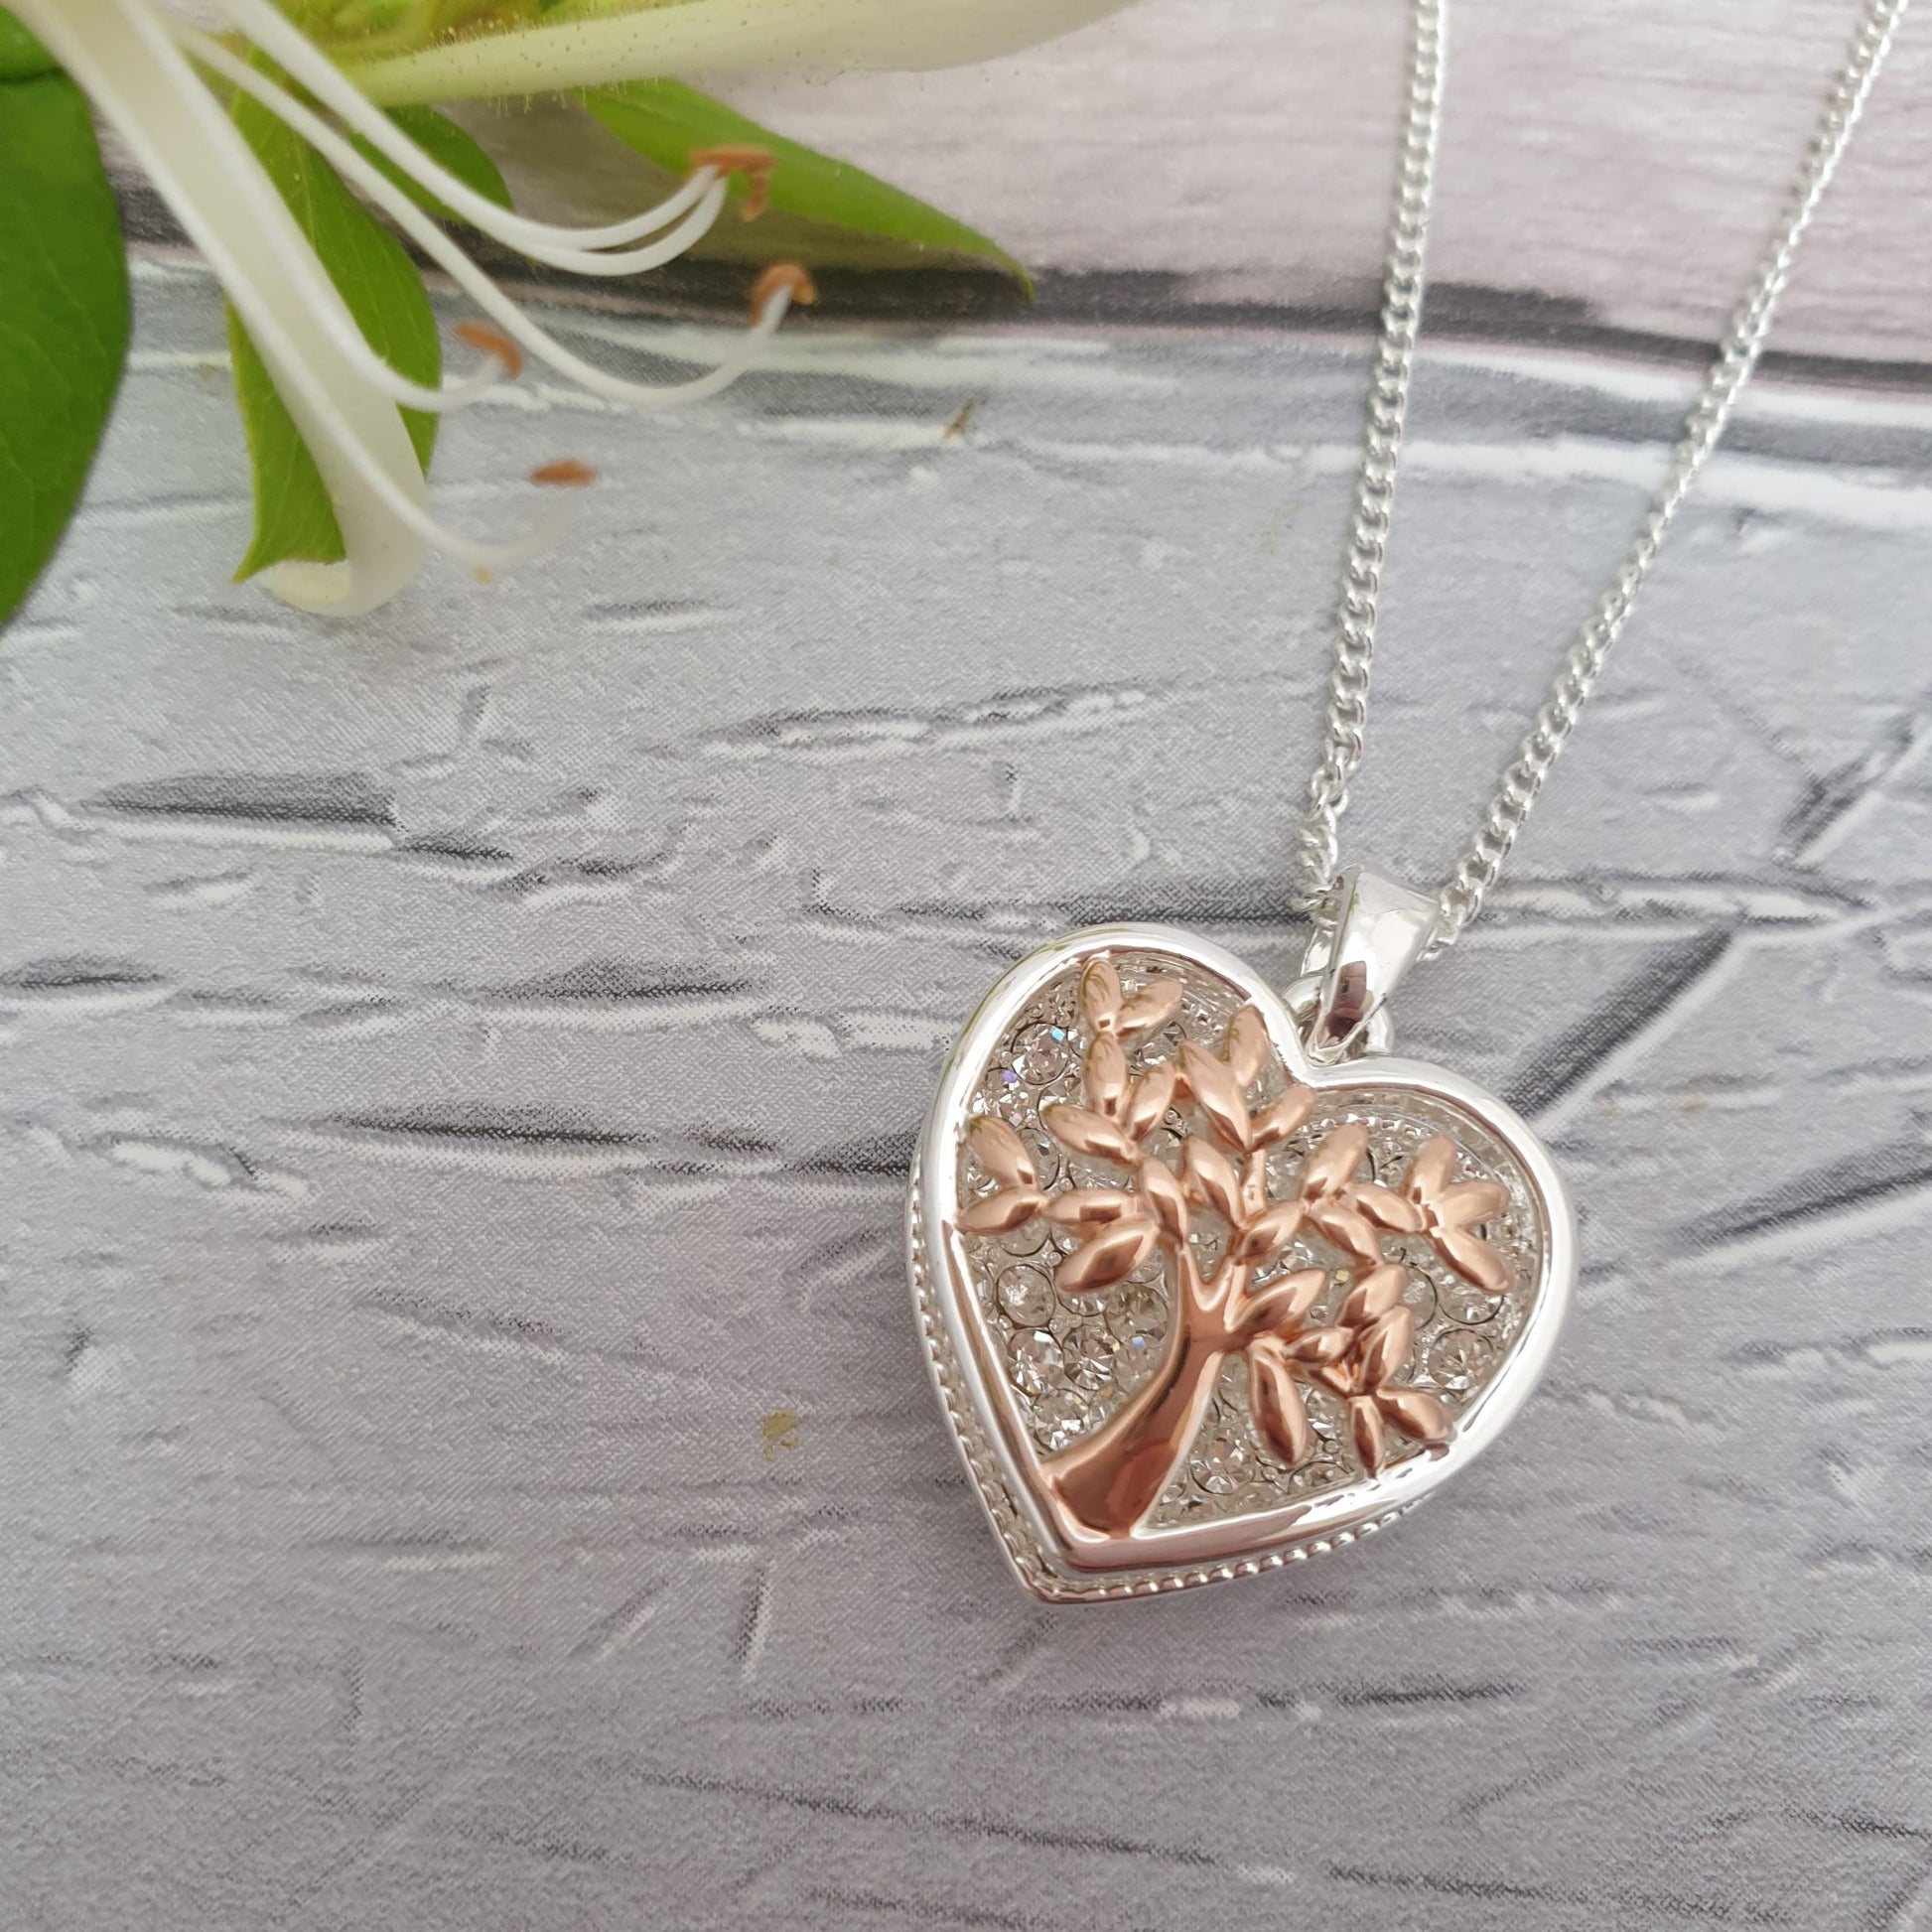 Tree of Life Pendant Necklaces in Rose Gold and Silver, finished with diamante crystals.